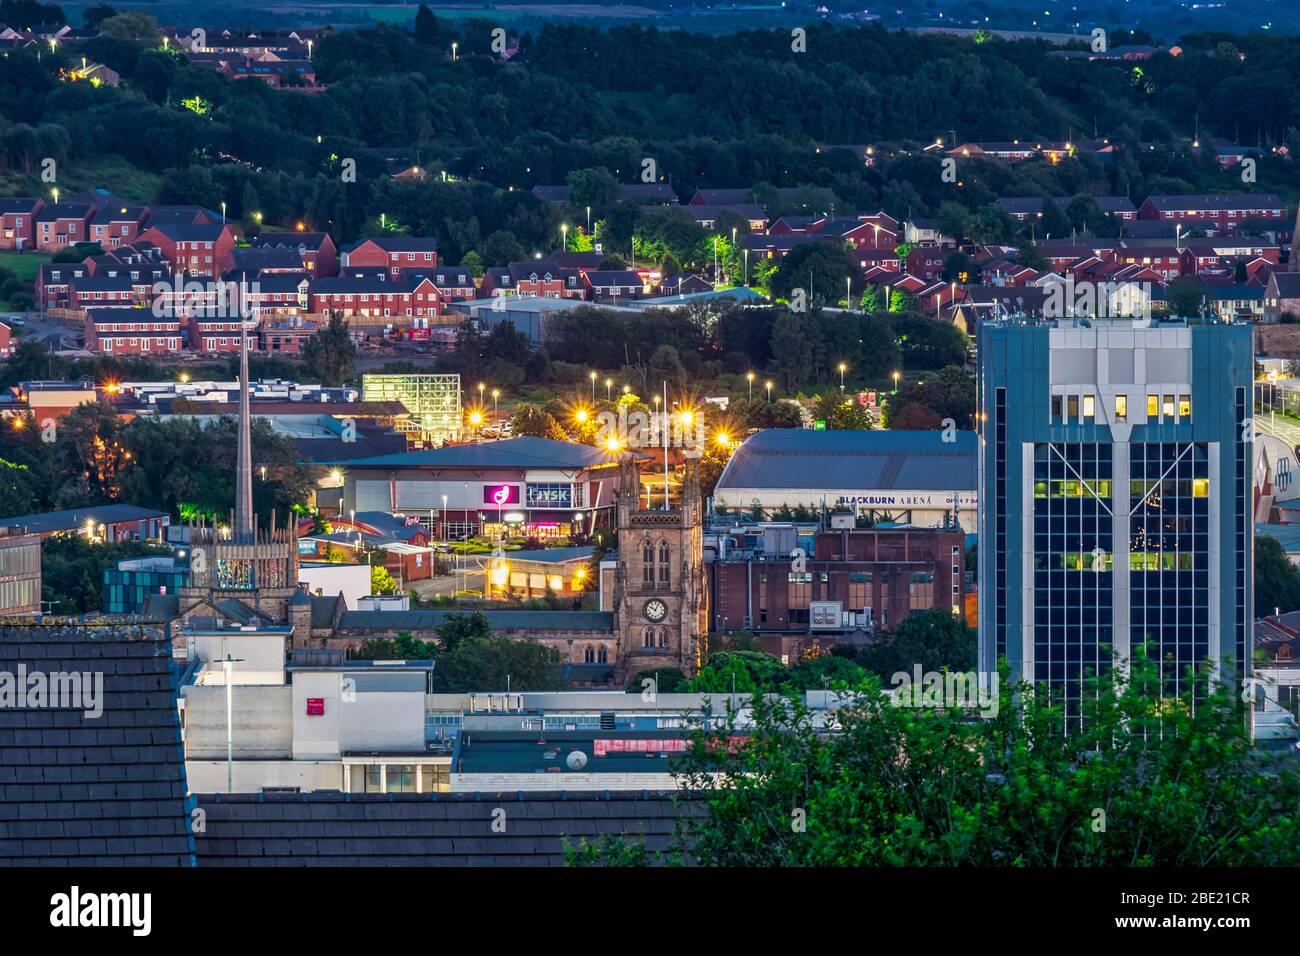 View of Blackburn Town Centre in the evening featuring the Blackburn Town Hall and Blackburn Cathedral Stock Photo